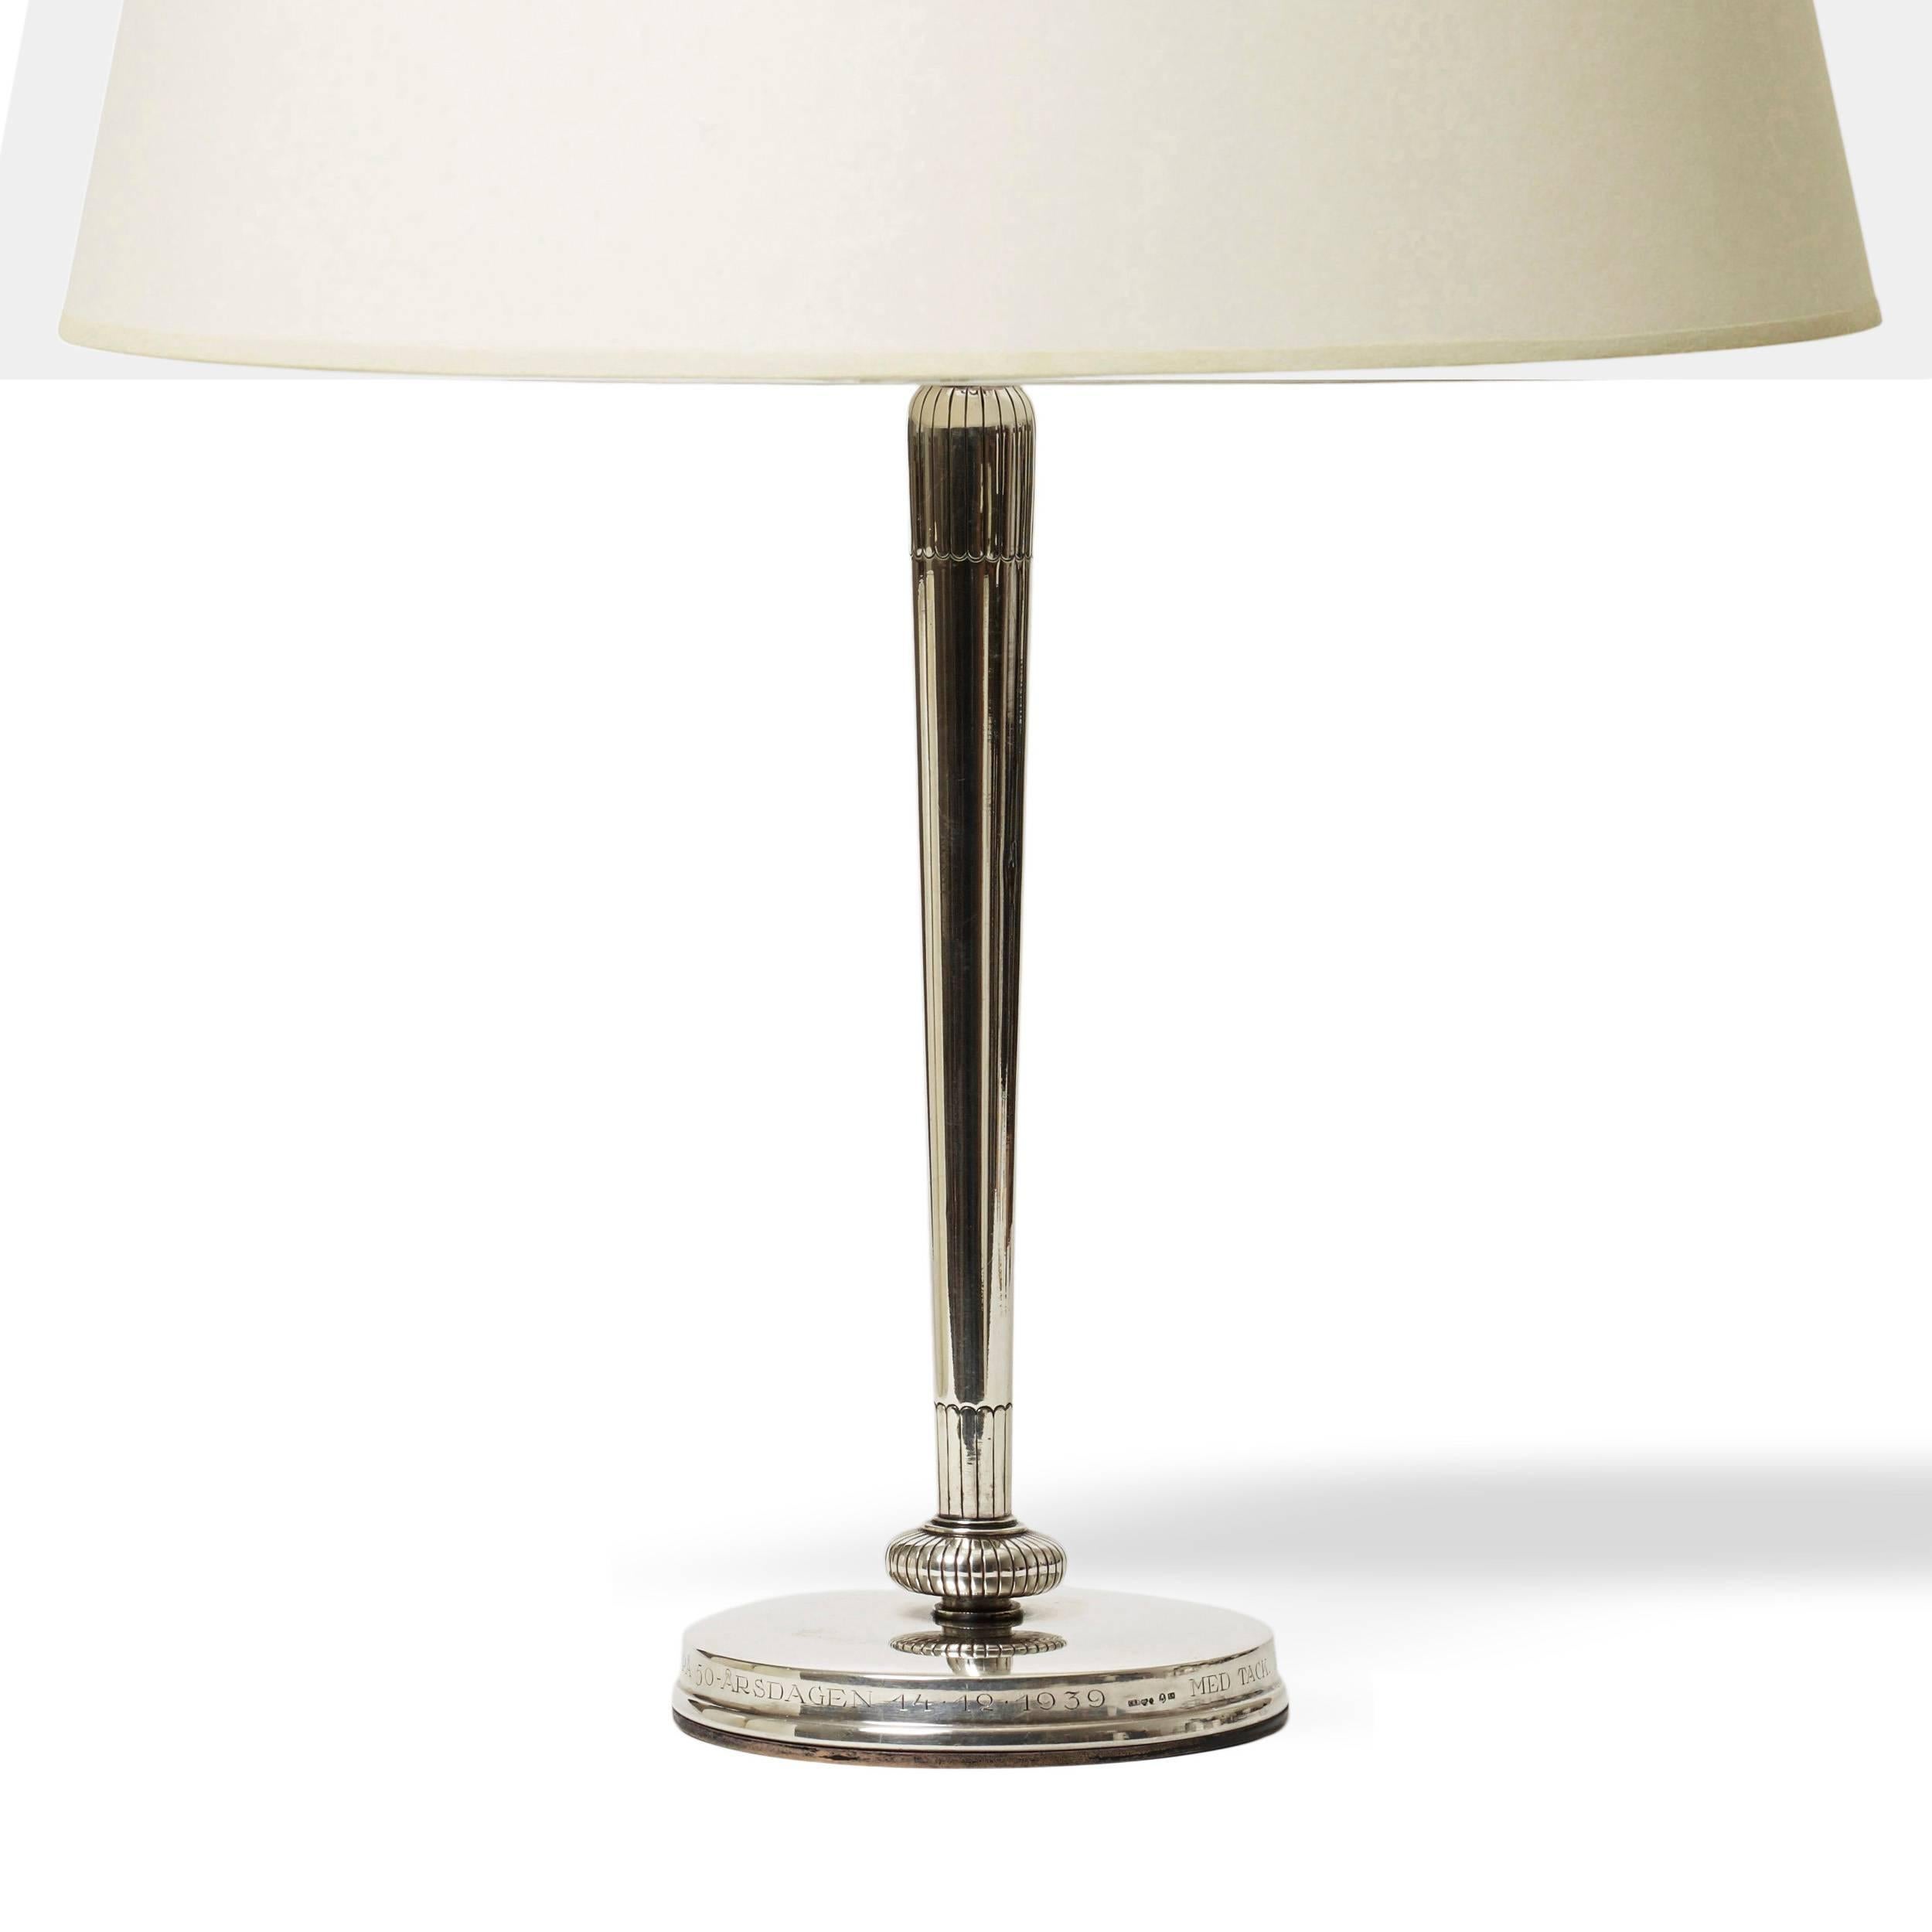 Pair of elegant and tailored Moderne style table lamps from the Carl Gustav Hallberg workshop, with vertical featuring a crisp taper and detailing around shoulder perched atop a disk fob detailed as a rosette on a round plinth, Sweden, 1937; Stamped